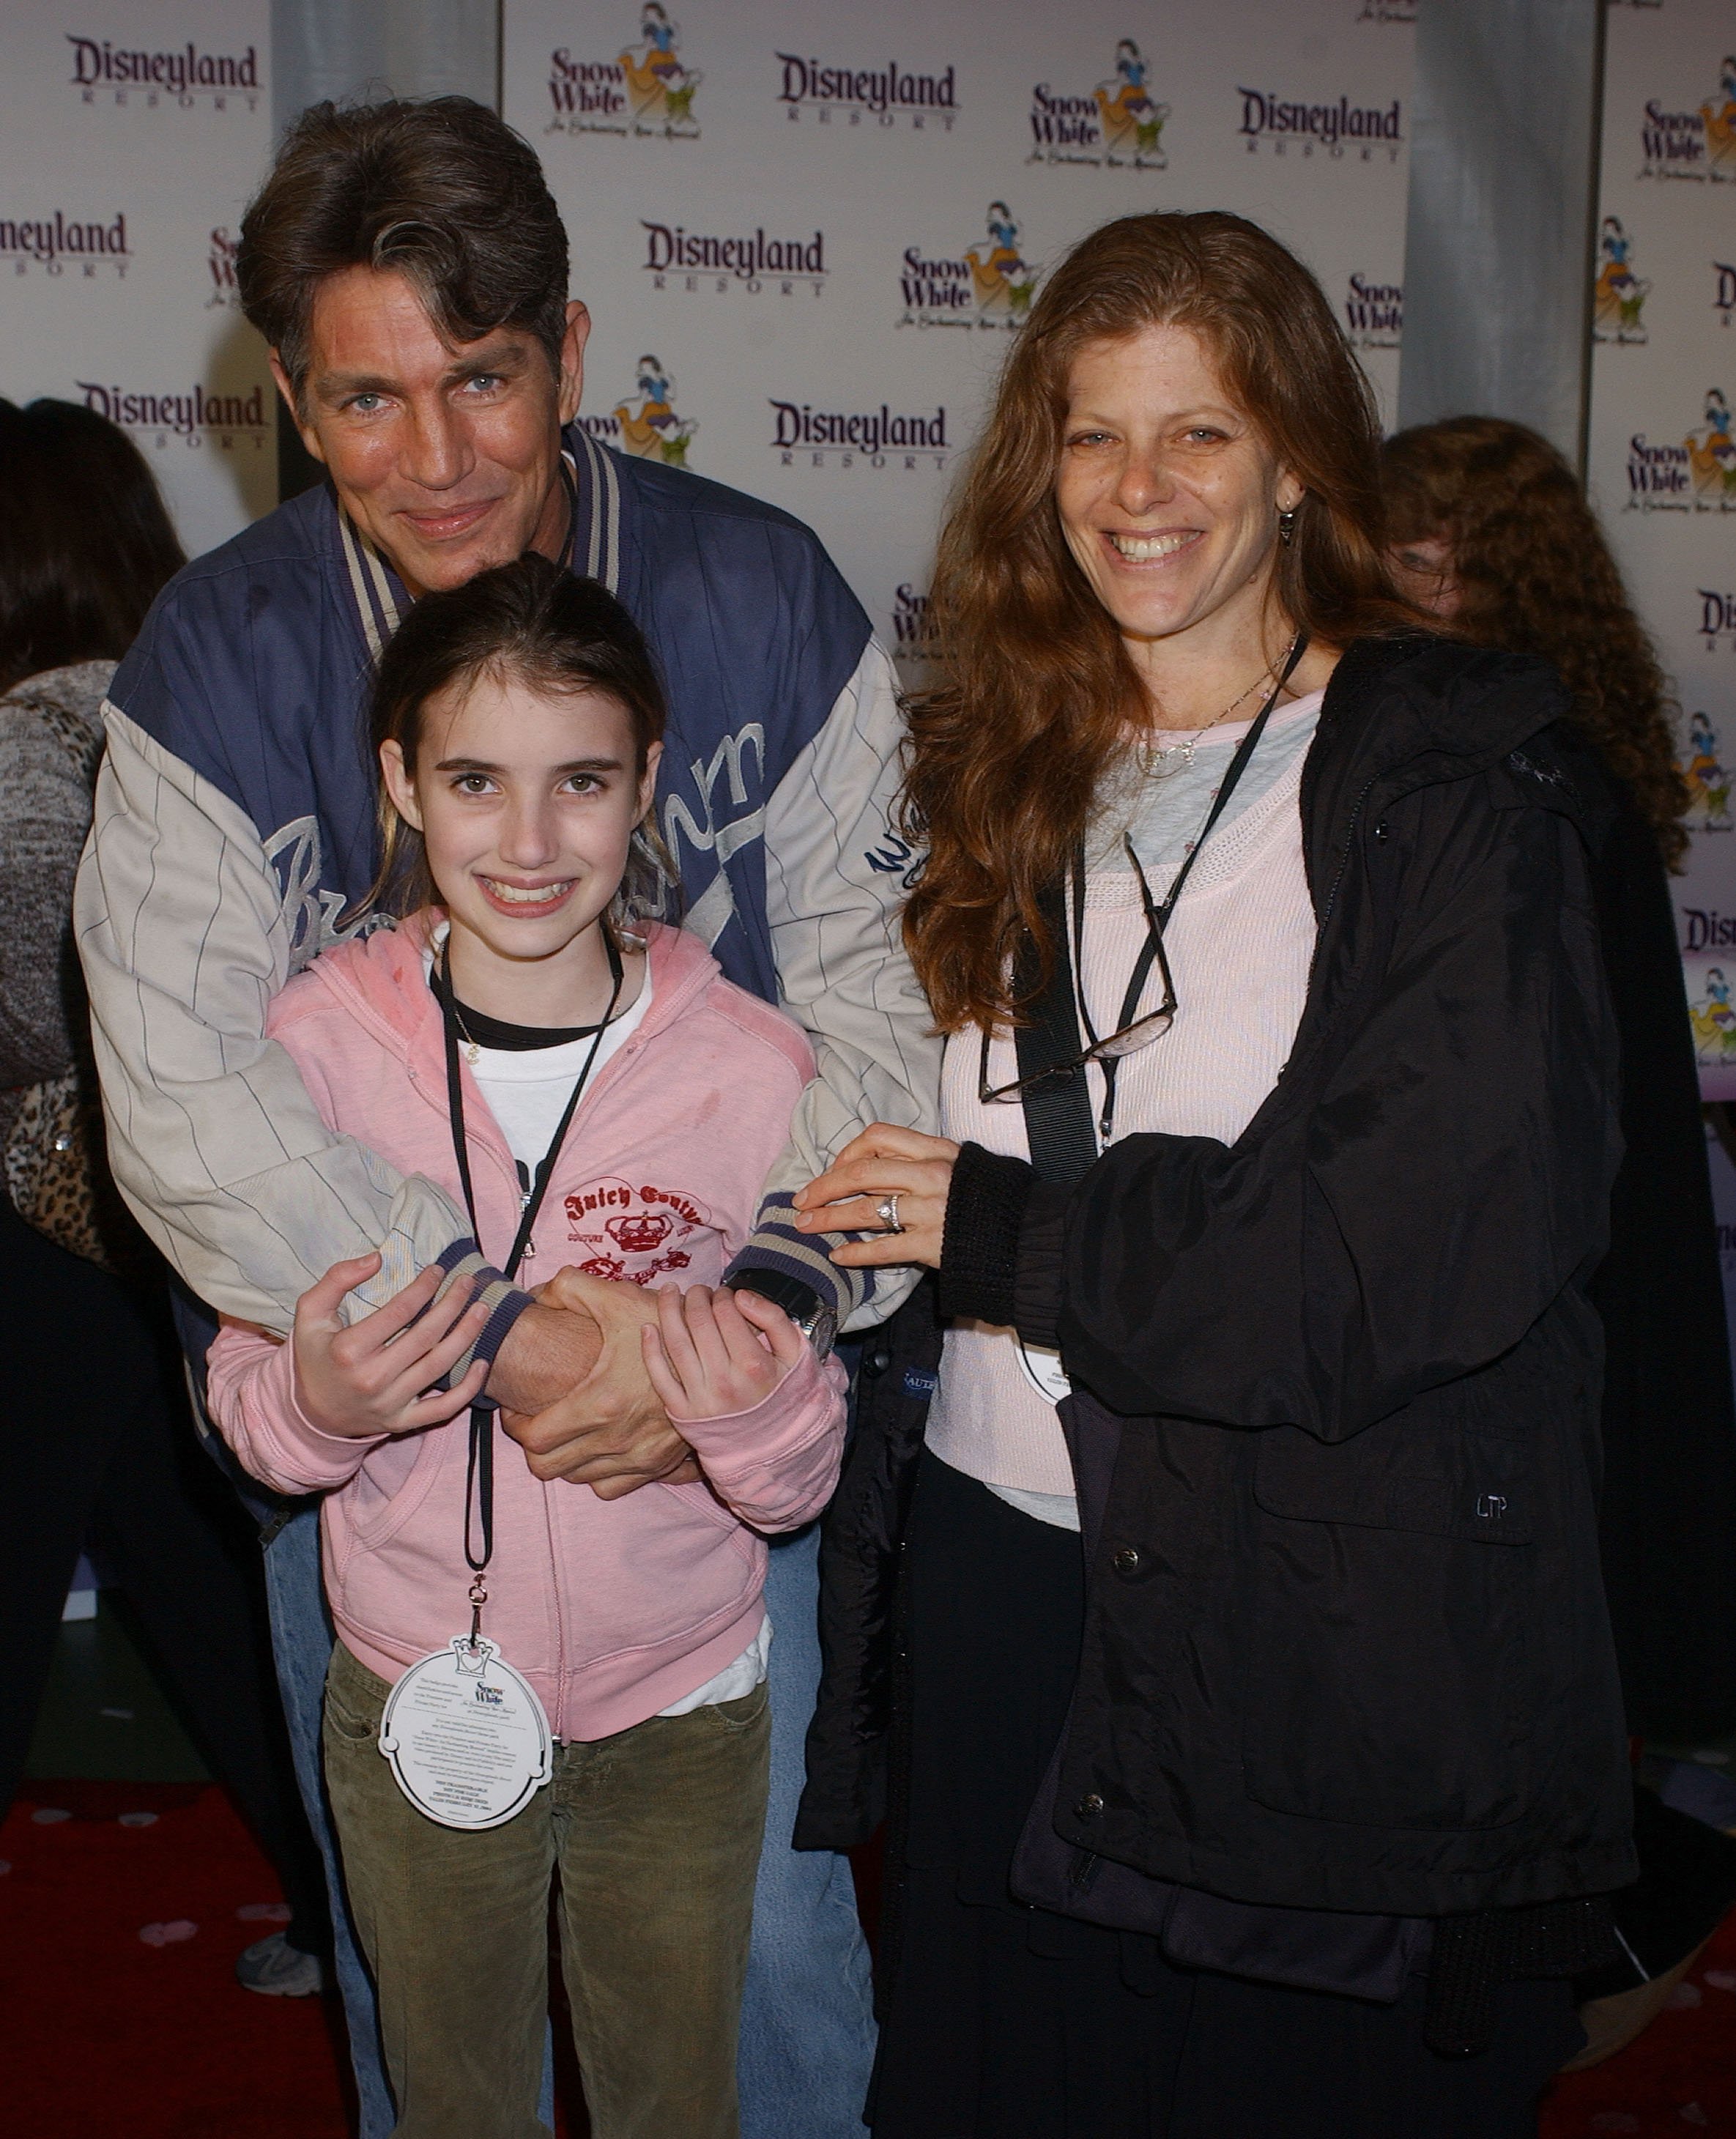 Eric Roberts, his daughter Emma, and his wife Eliza during "Snow White - An Enchanting New Musical" Premiere - Arrivals at Fantasyland Theatre at Disneyland in Anaheim, California, United States.  | Source: Getty Images